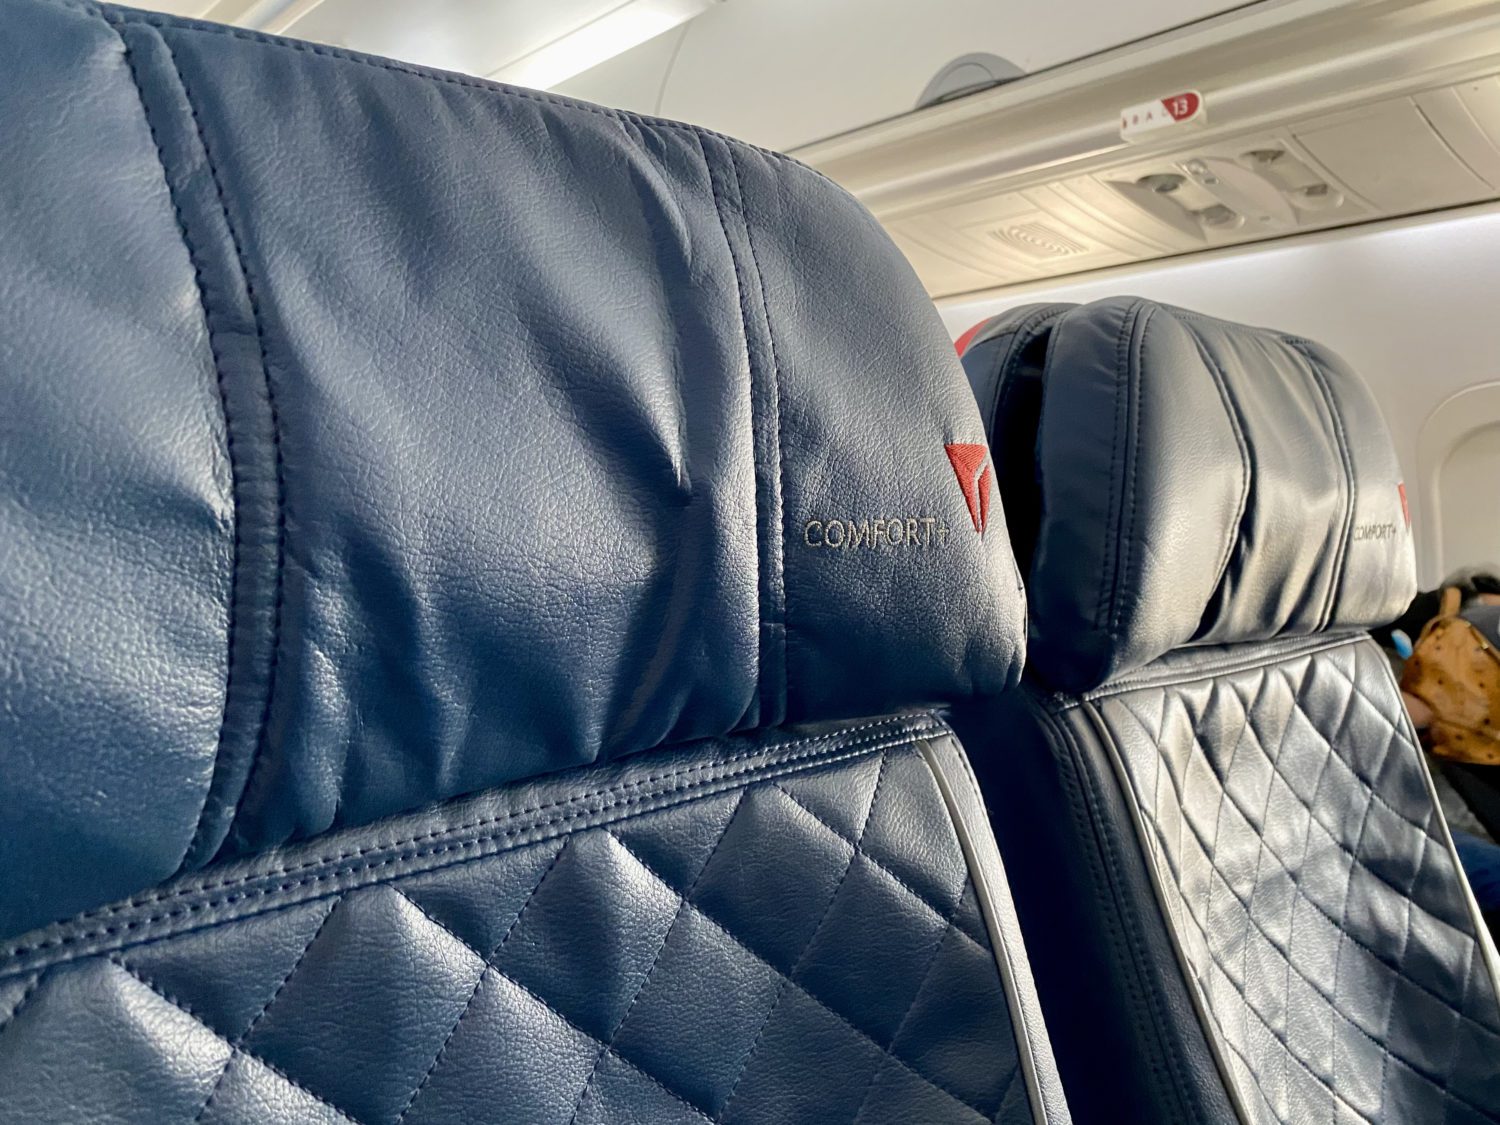 Delta Comfort Plus  Review: What is Delta Comfort Plus – And Is It Worth It? – Thrifty Traveler &#8211; Thrifty Traveler IMG 3841 scaled